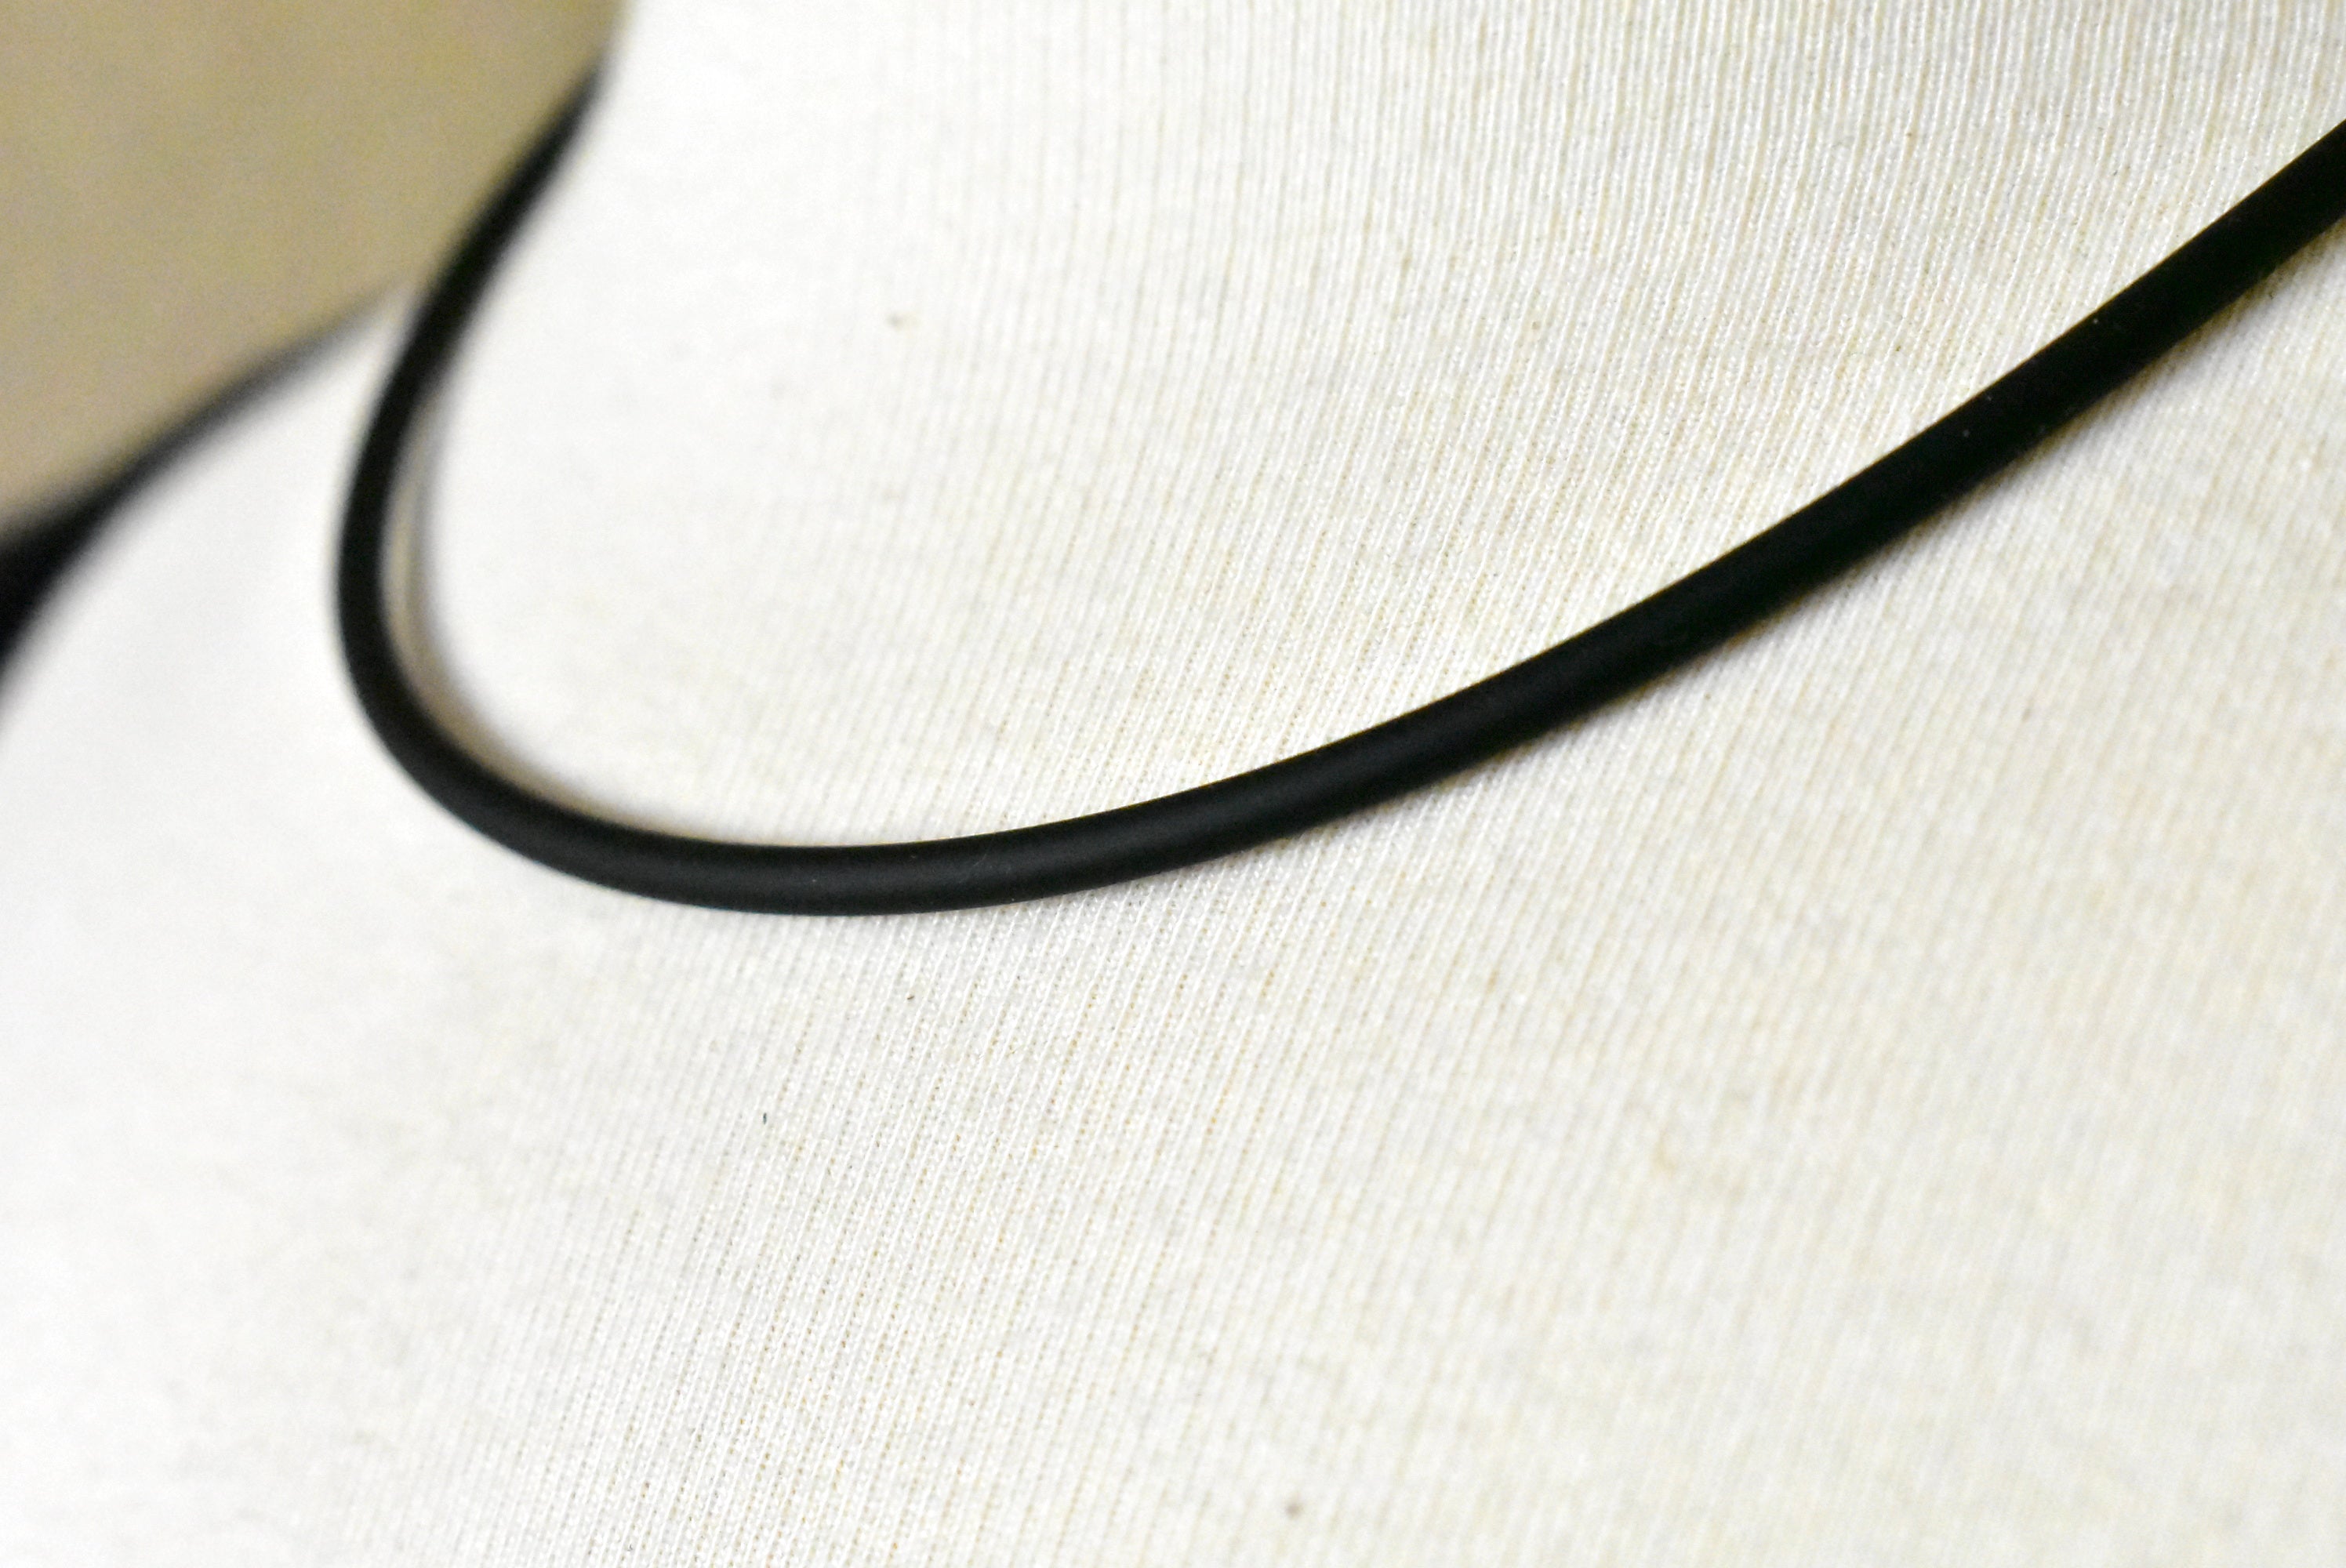 Black 3mm Rubber Cord Necklace with Sterling Silver Clasp